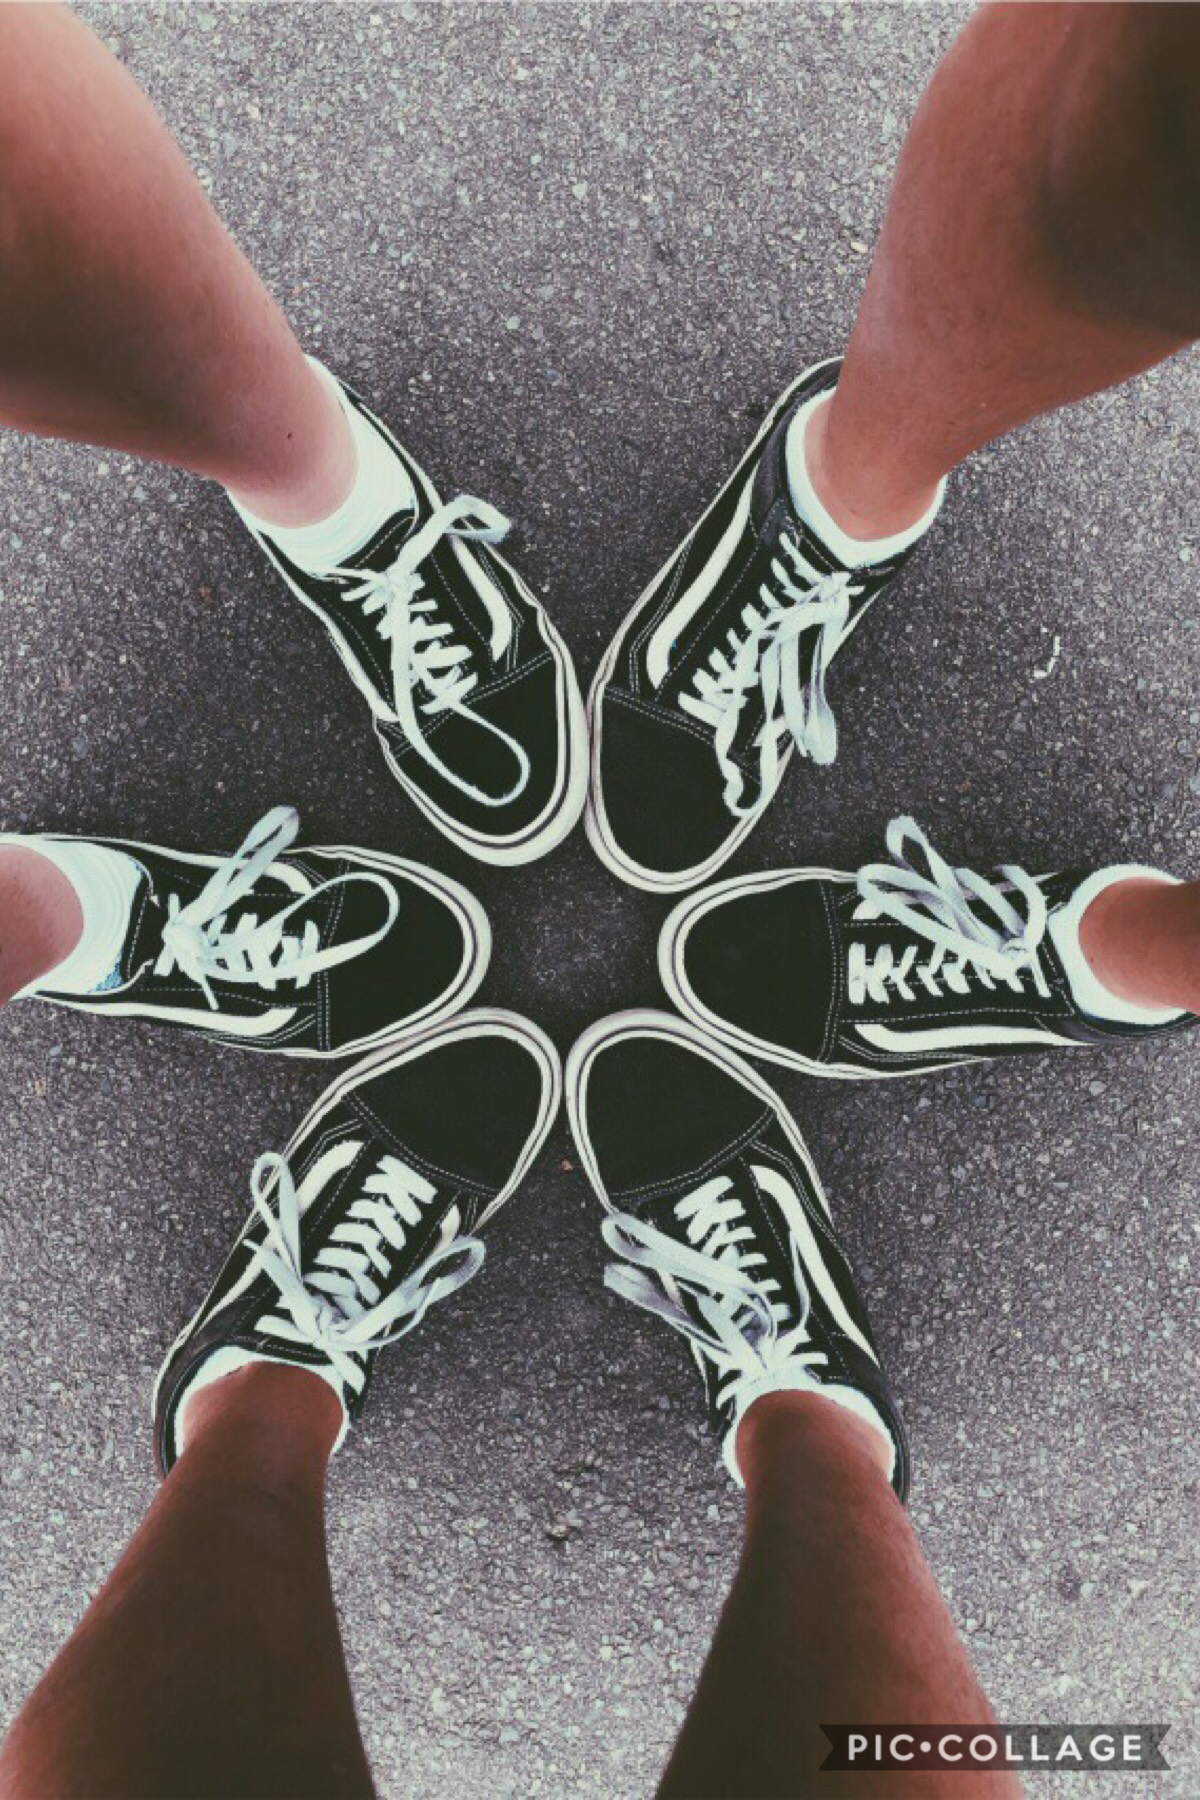 Picture #2! This wasn’t taken by me, but one of my best friends with our awesome shoeeess 😂 I’m the one closest to the top left corner :p and if you know who I am- please don’t make it obvious! 😉😉😉 